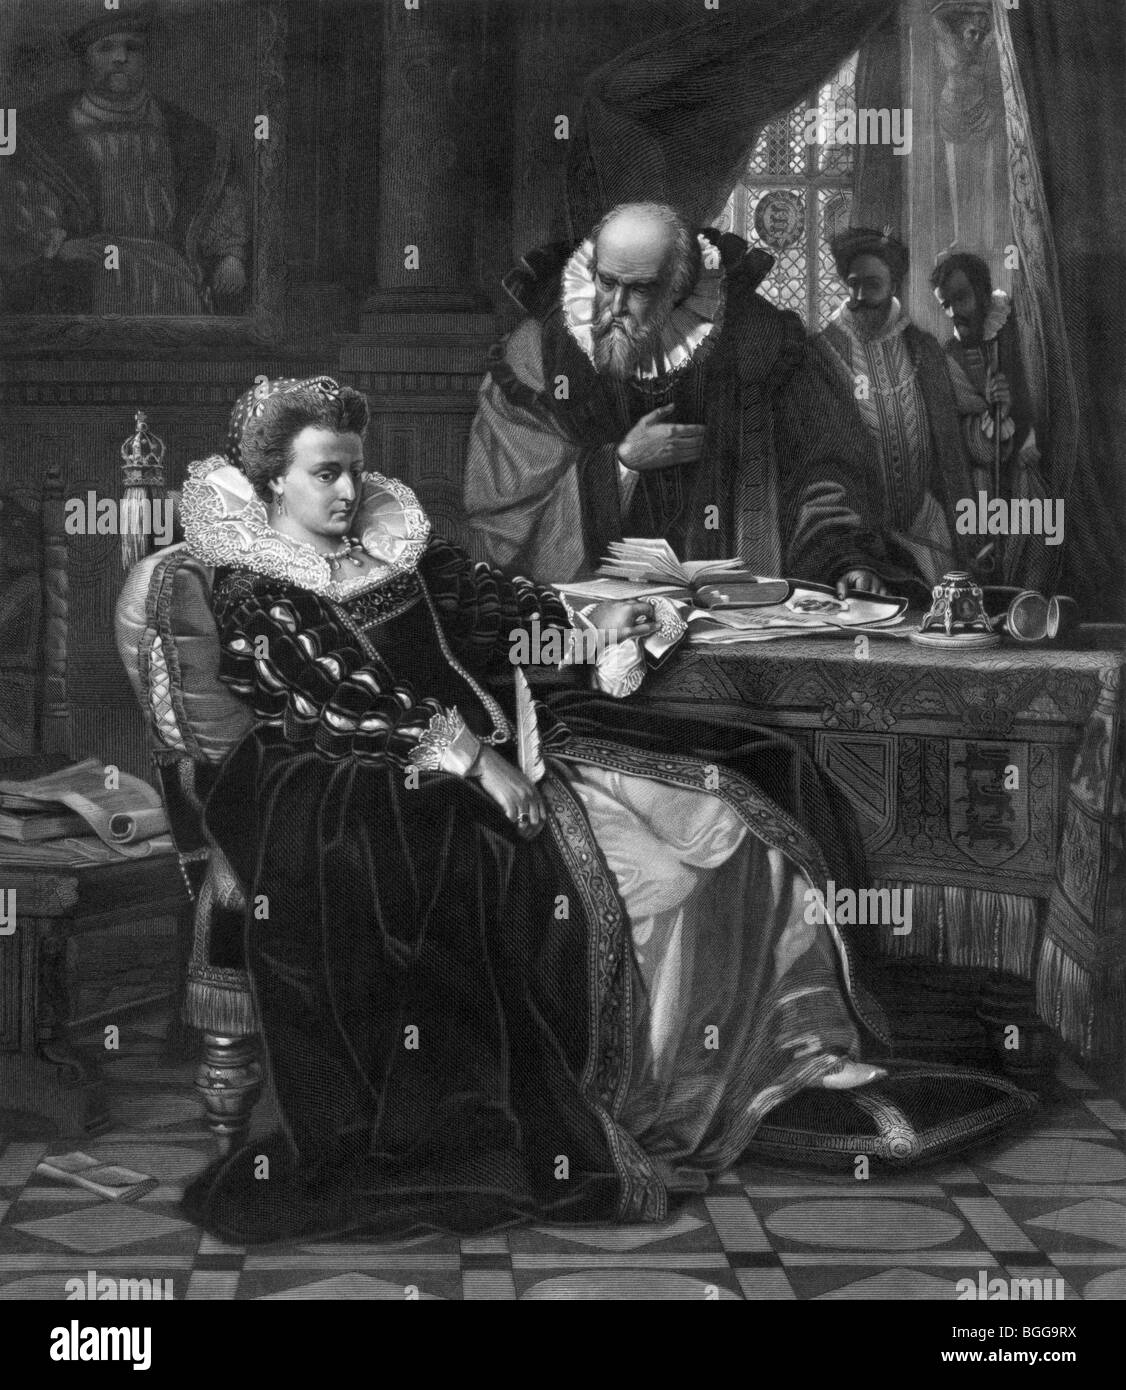 Portrait print of Queen Elizabeth I of England consenting to the execution of Marie Stuart (Mary I Queen of Scots) in 1587. Stock Photo